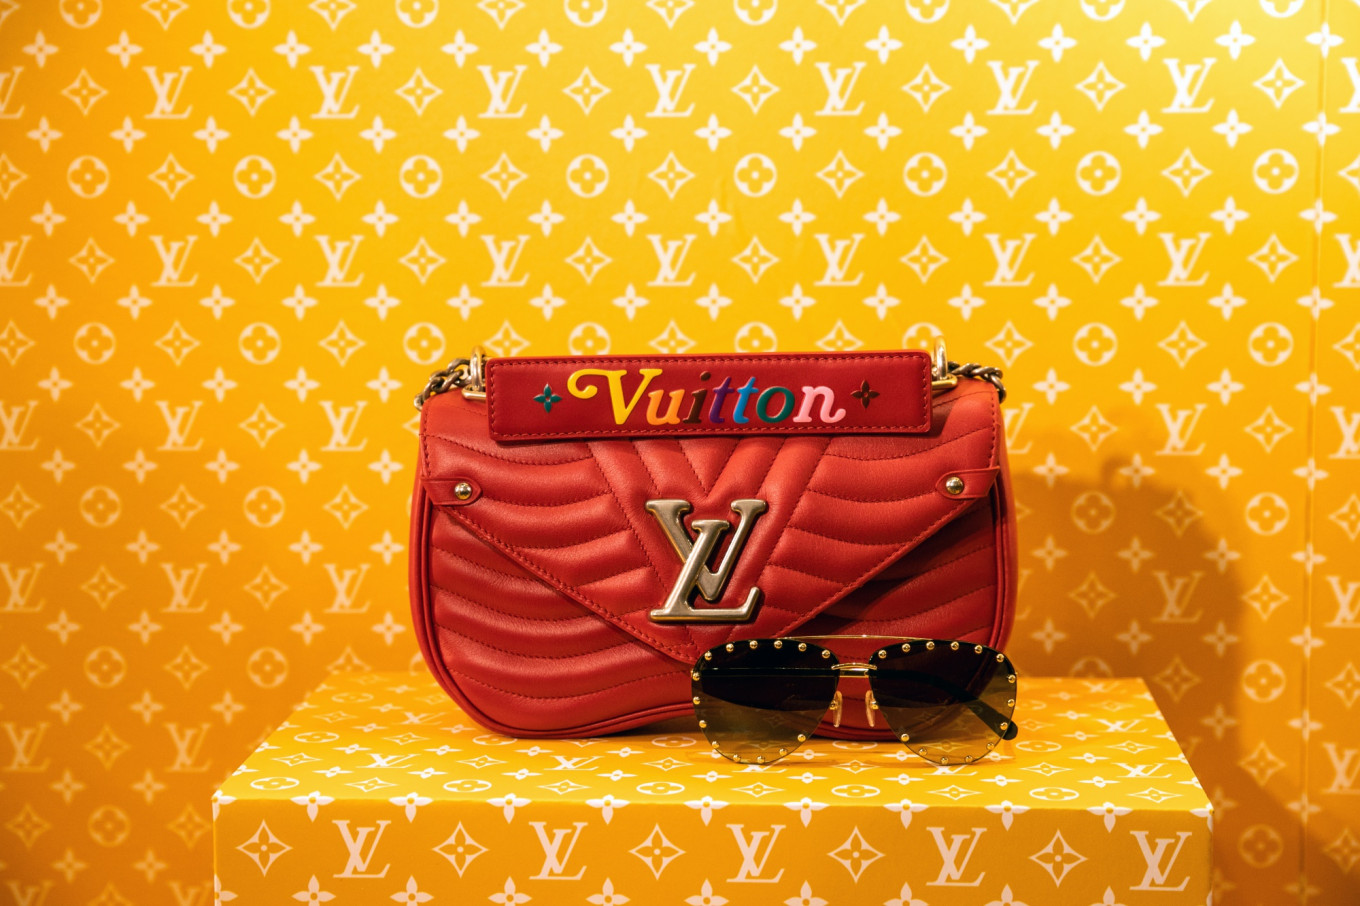 Vying for Vuitton: China's e-commerce rivals seek luxury stranglehold